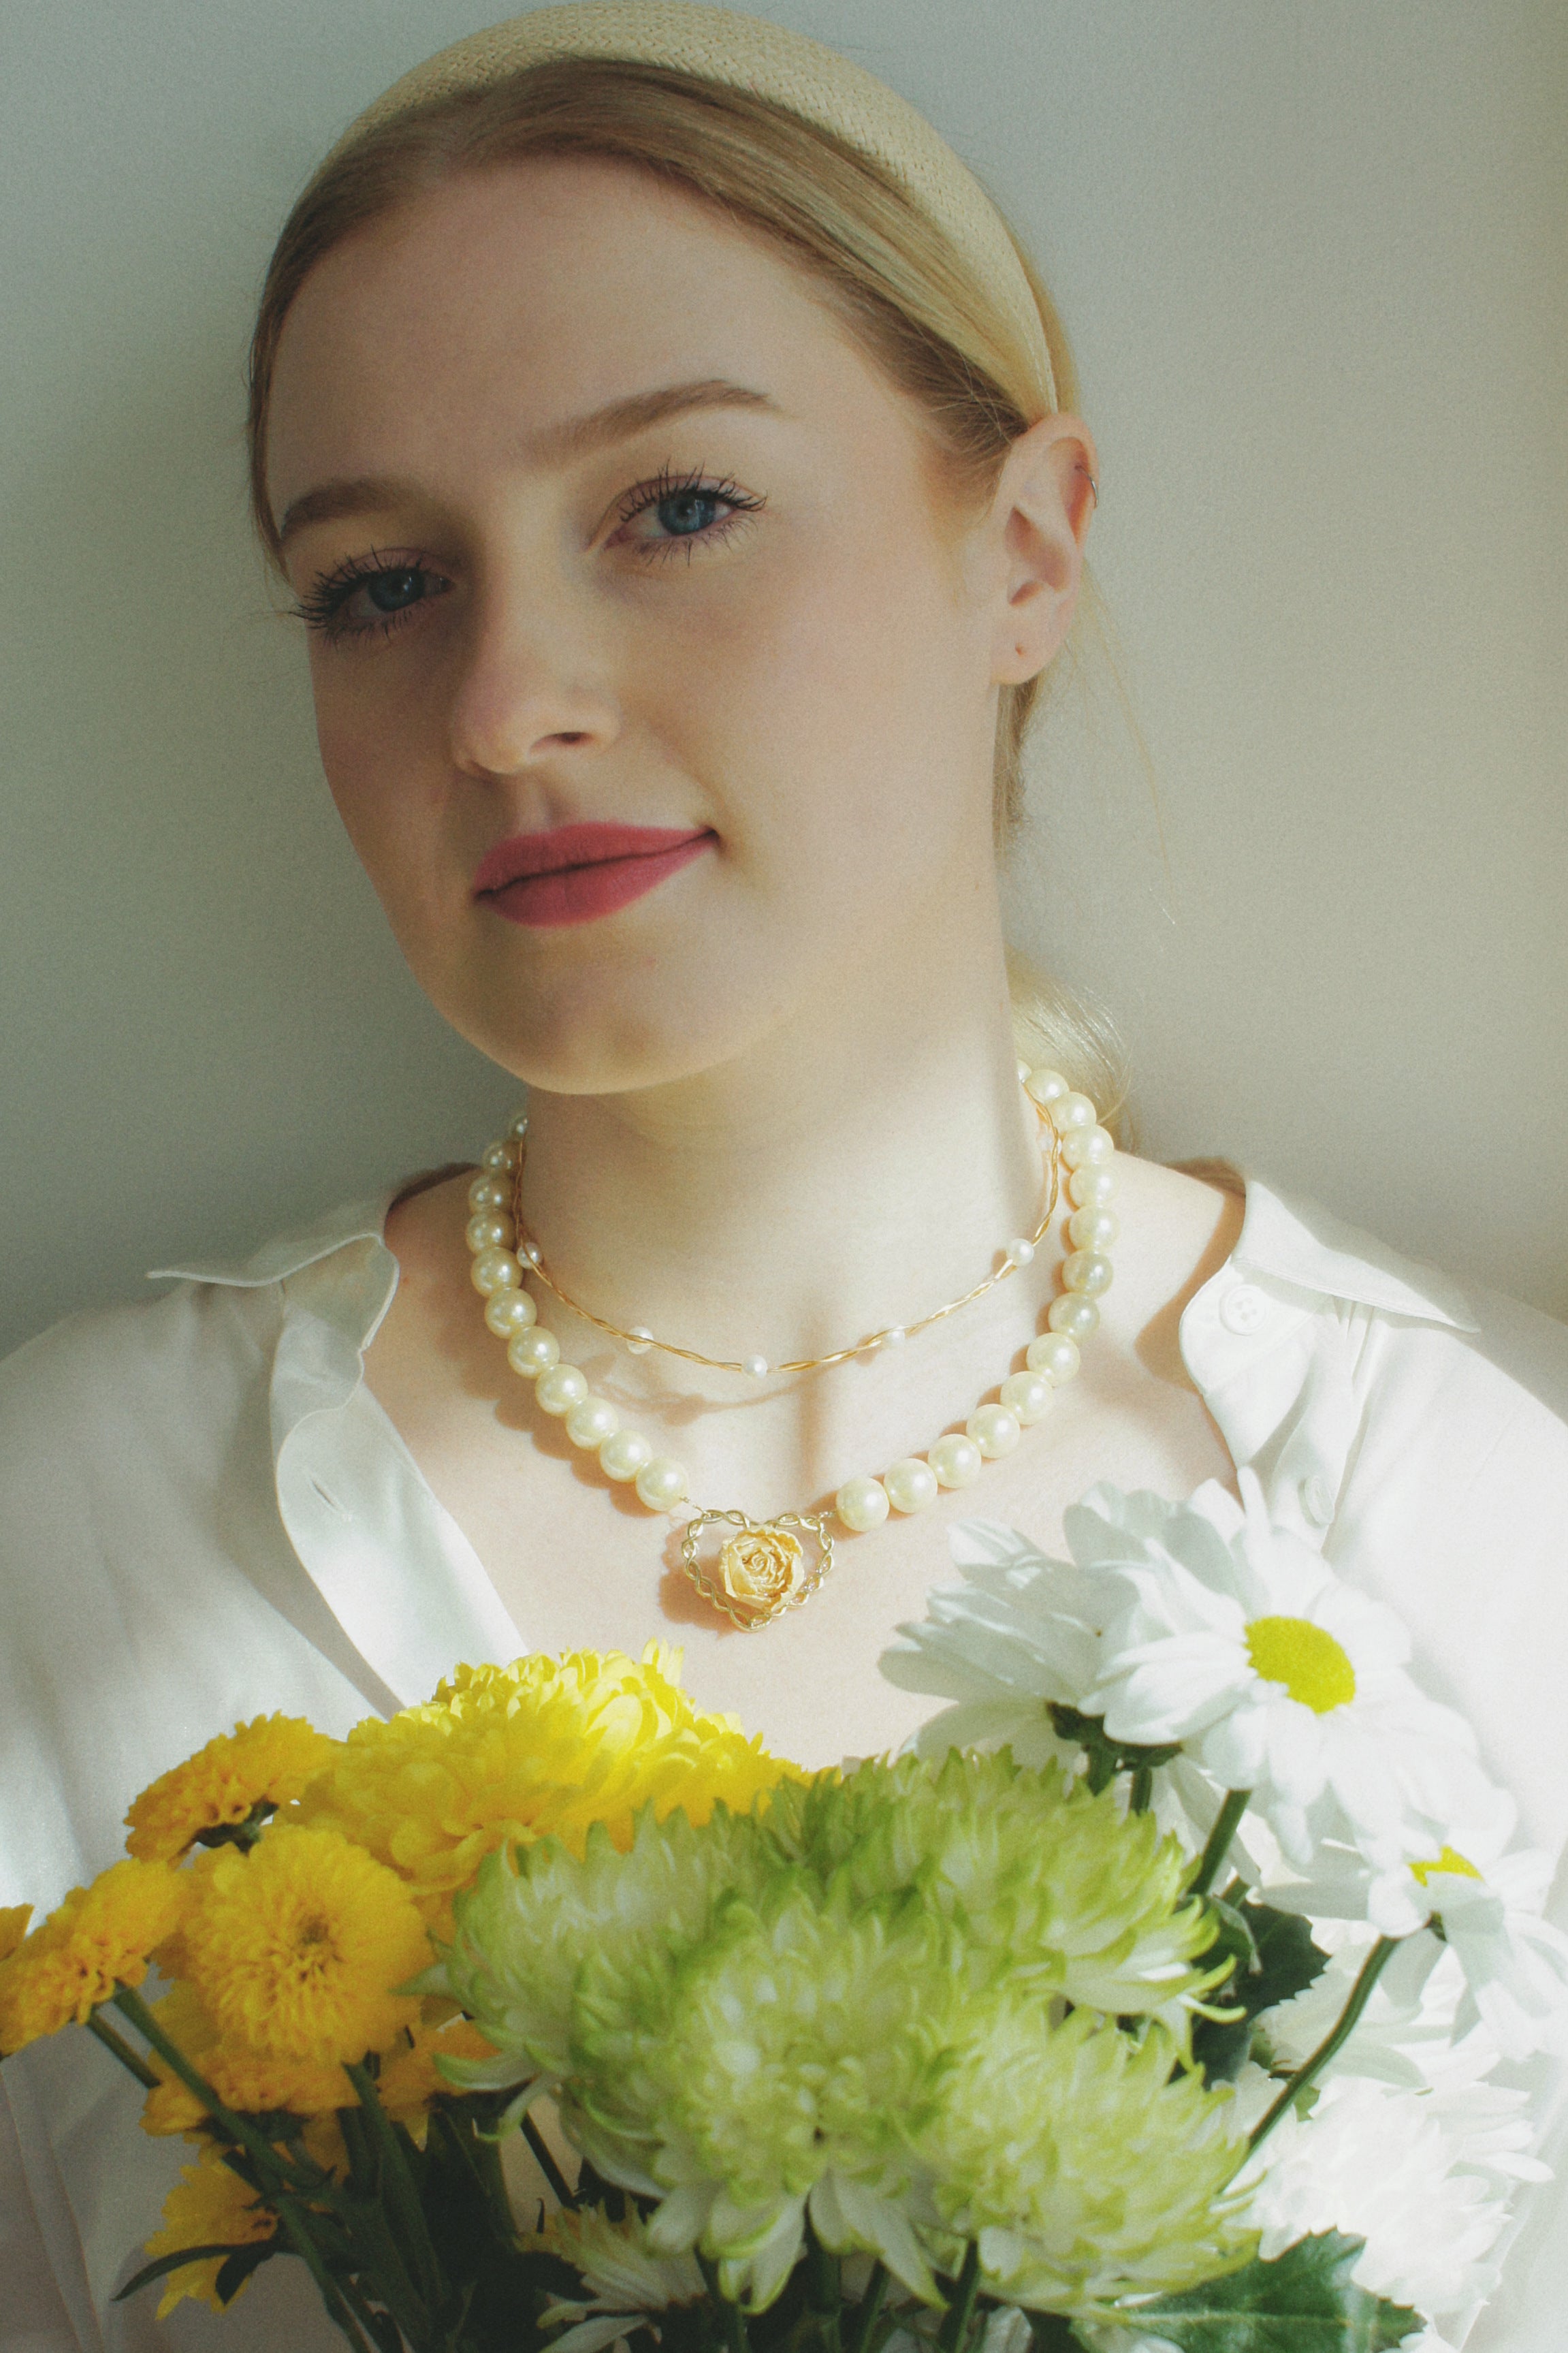 *REAL FLOWER* Rosa Blanca Pearl Necklace with Rosebud Pendant on Golden Rope Heart